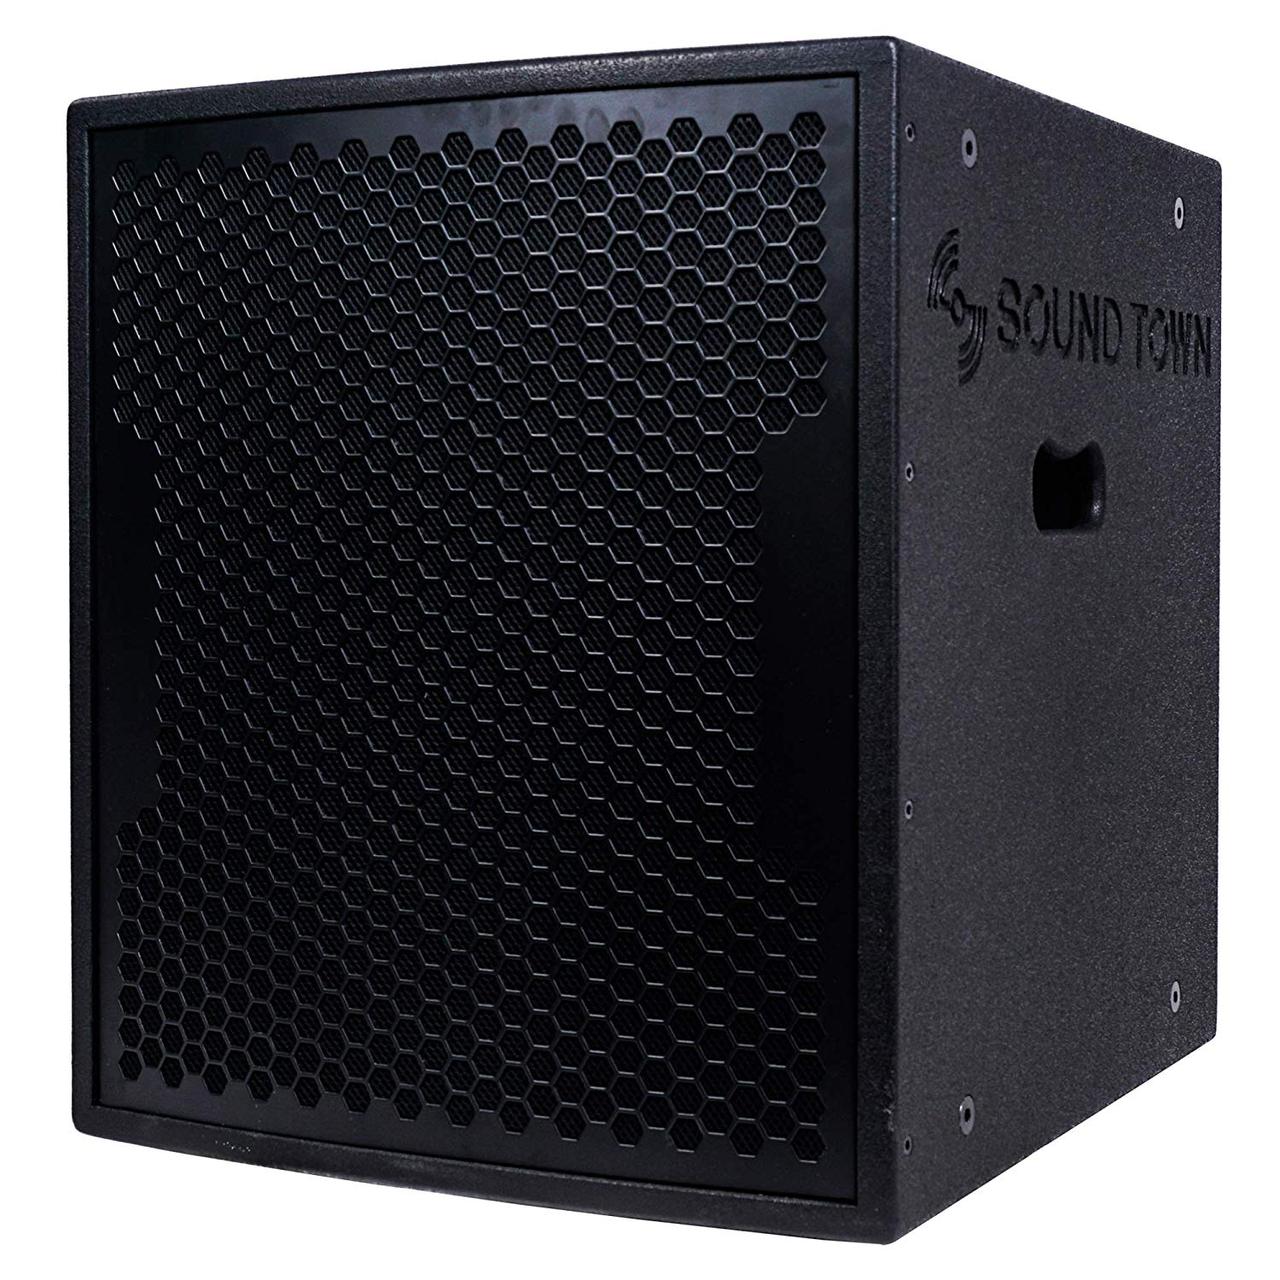 Sound Town 1600 Watts 15” Powered Subwoofer with 2 Speaker Outputs, Plywood Enclosure and 2 Wheels, Black (CARPO-15SPW) - image 3 of 6